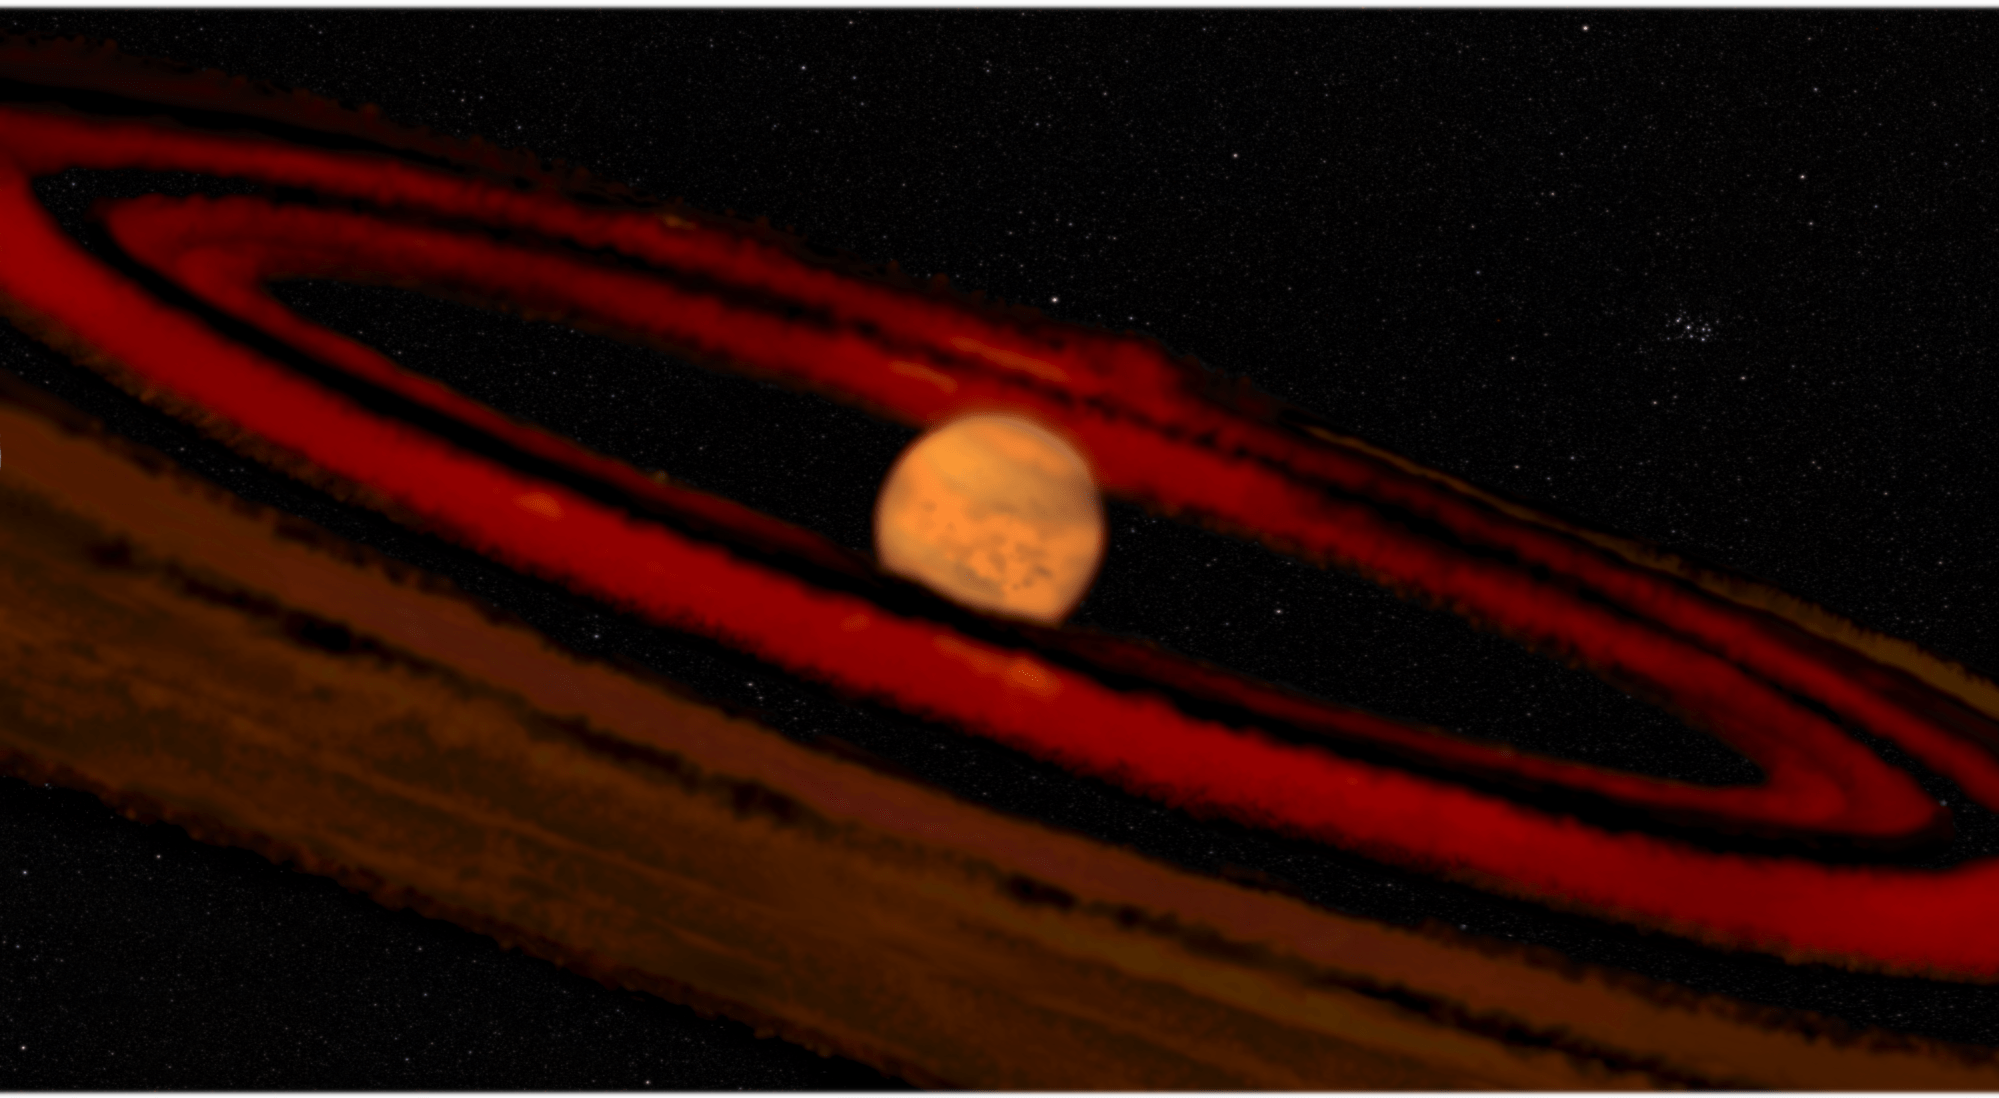 Image of an orange planet with red rings